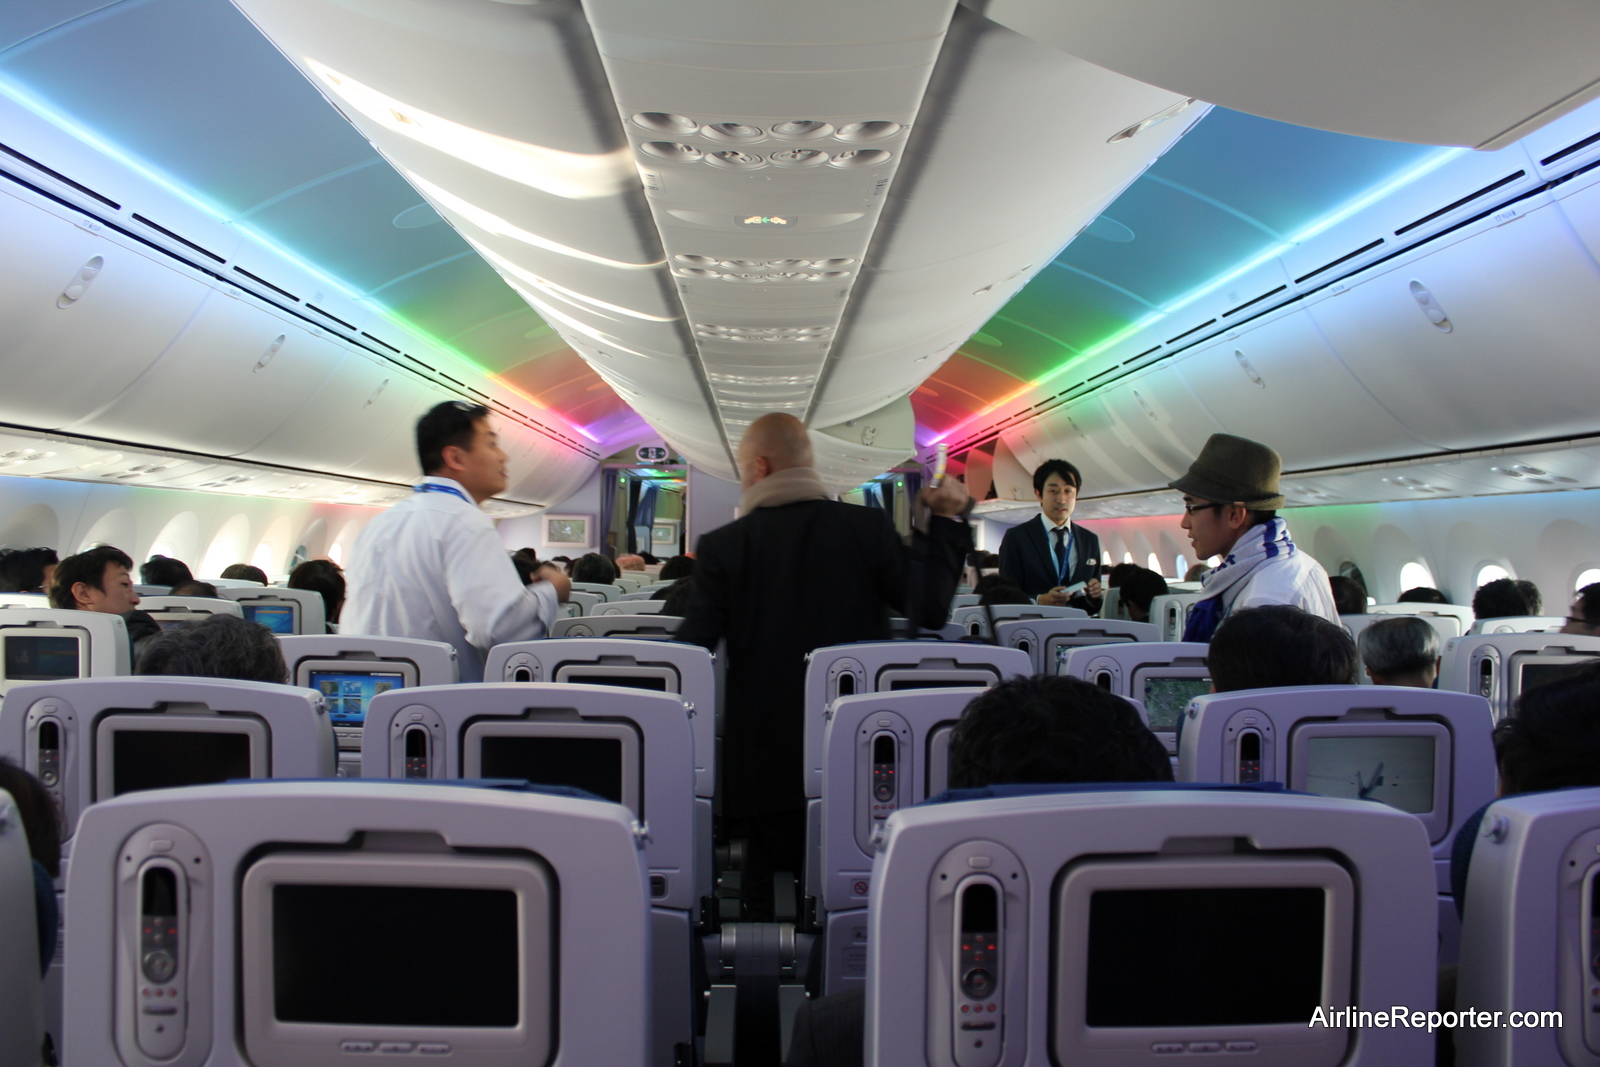 Flying On The Boeing 787 Dreamliner For The First Time